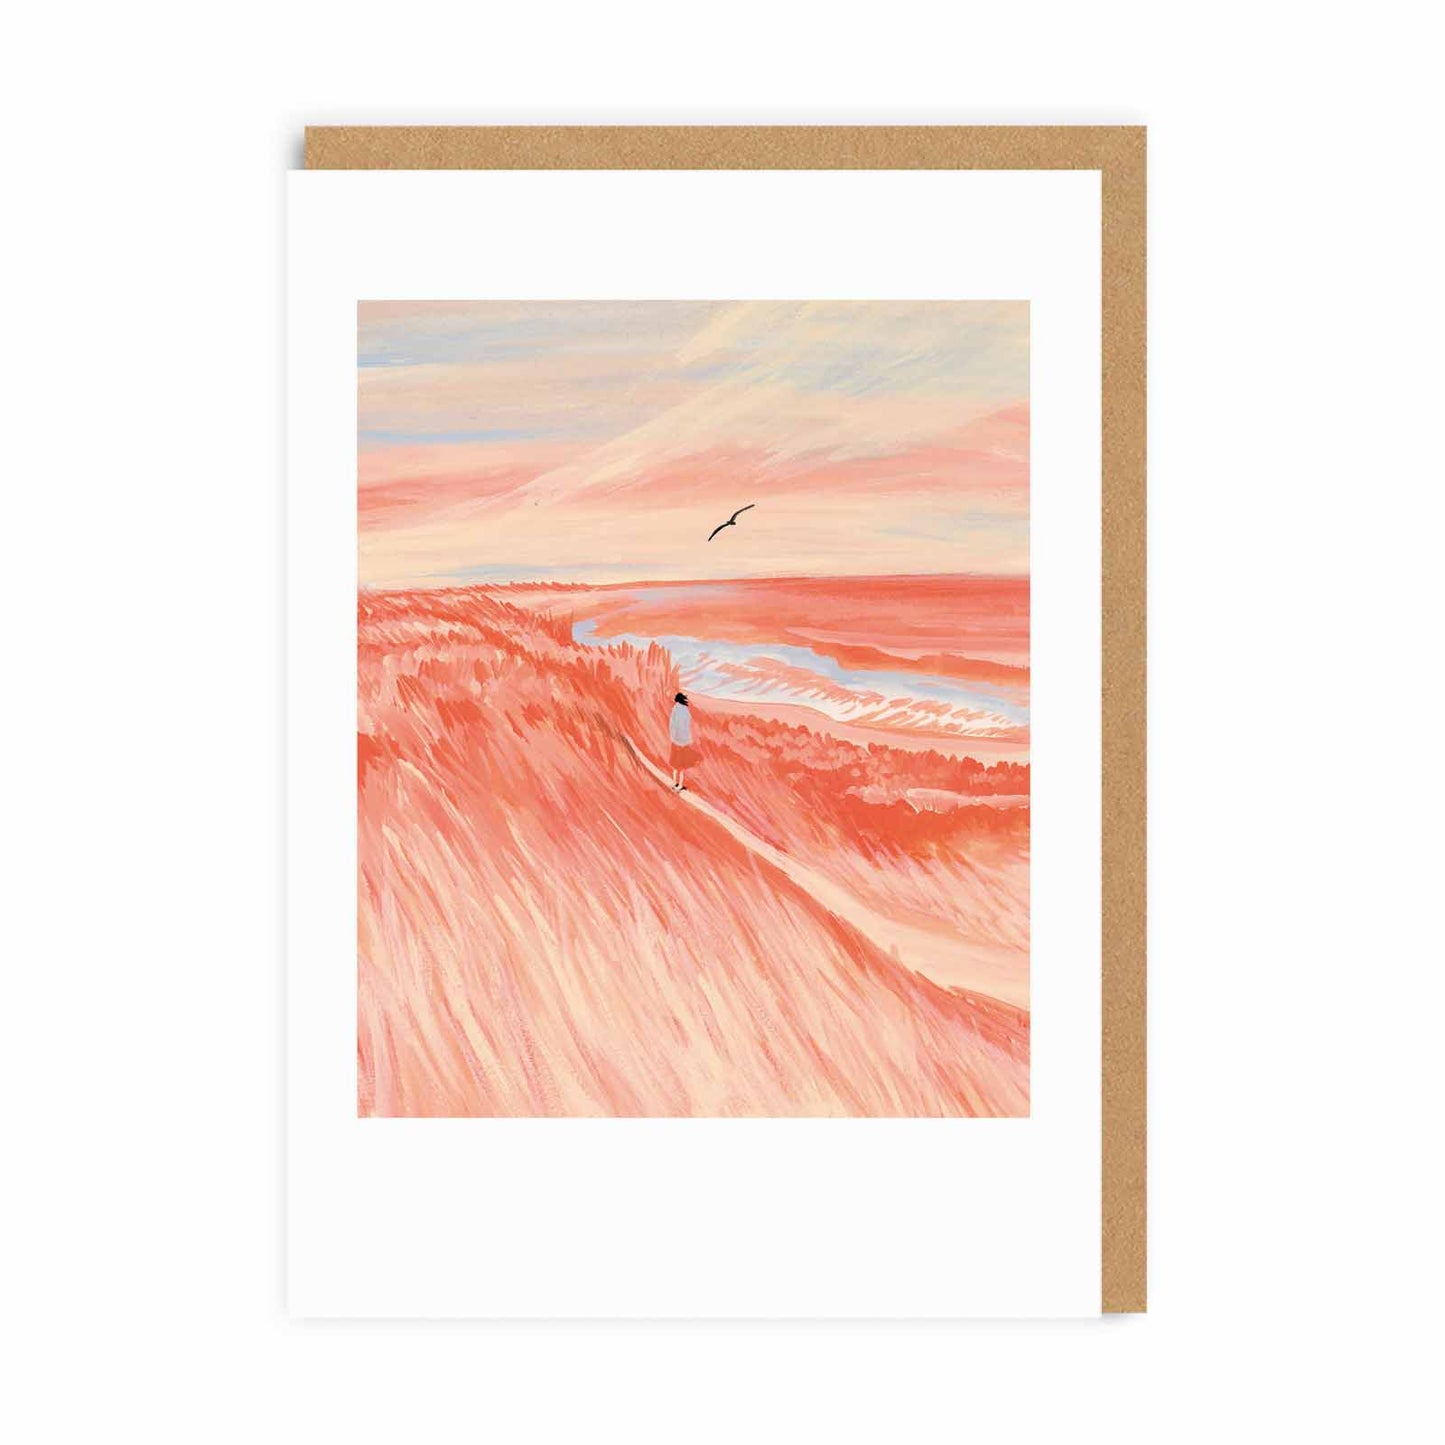 Greeting card with Red grass fields illustration